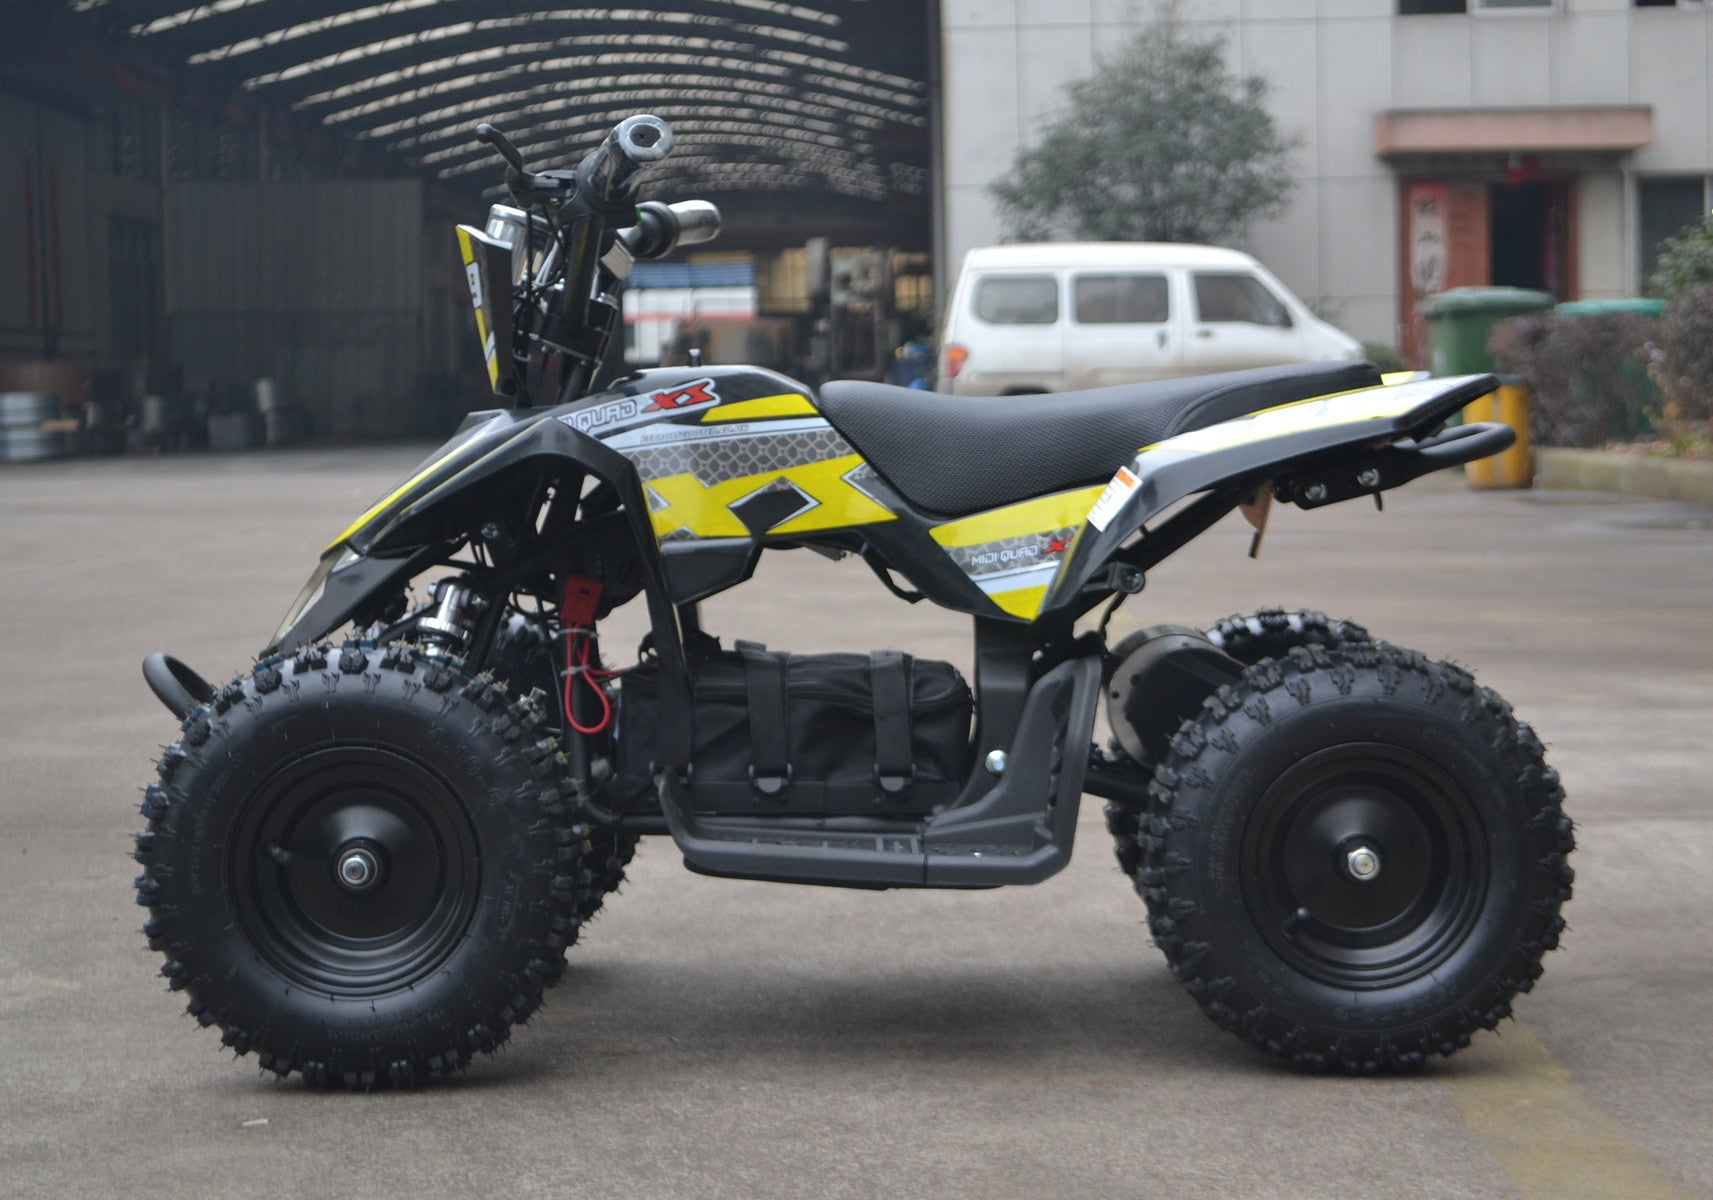 Where to buy kids Electric ATV from?